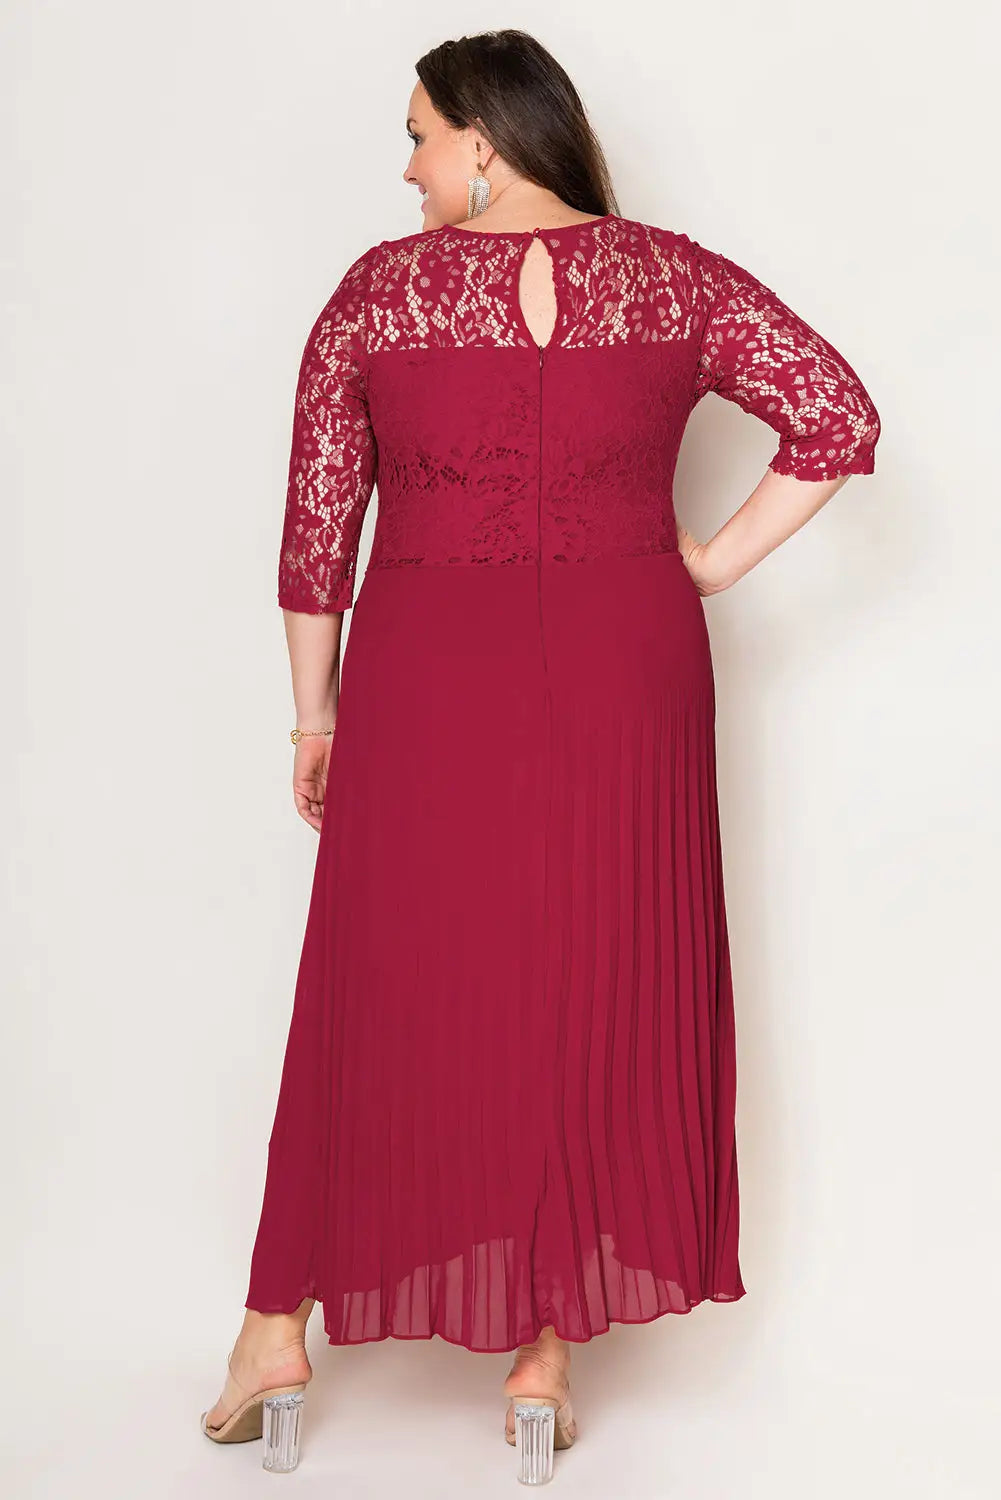 Red lace scalloped v neck 3/4 sleeves pleated tulle plus maxi dress - size